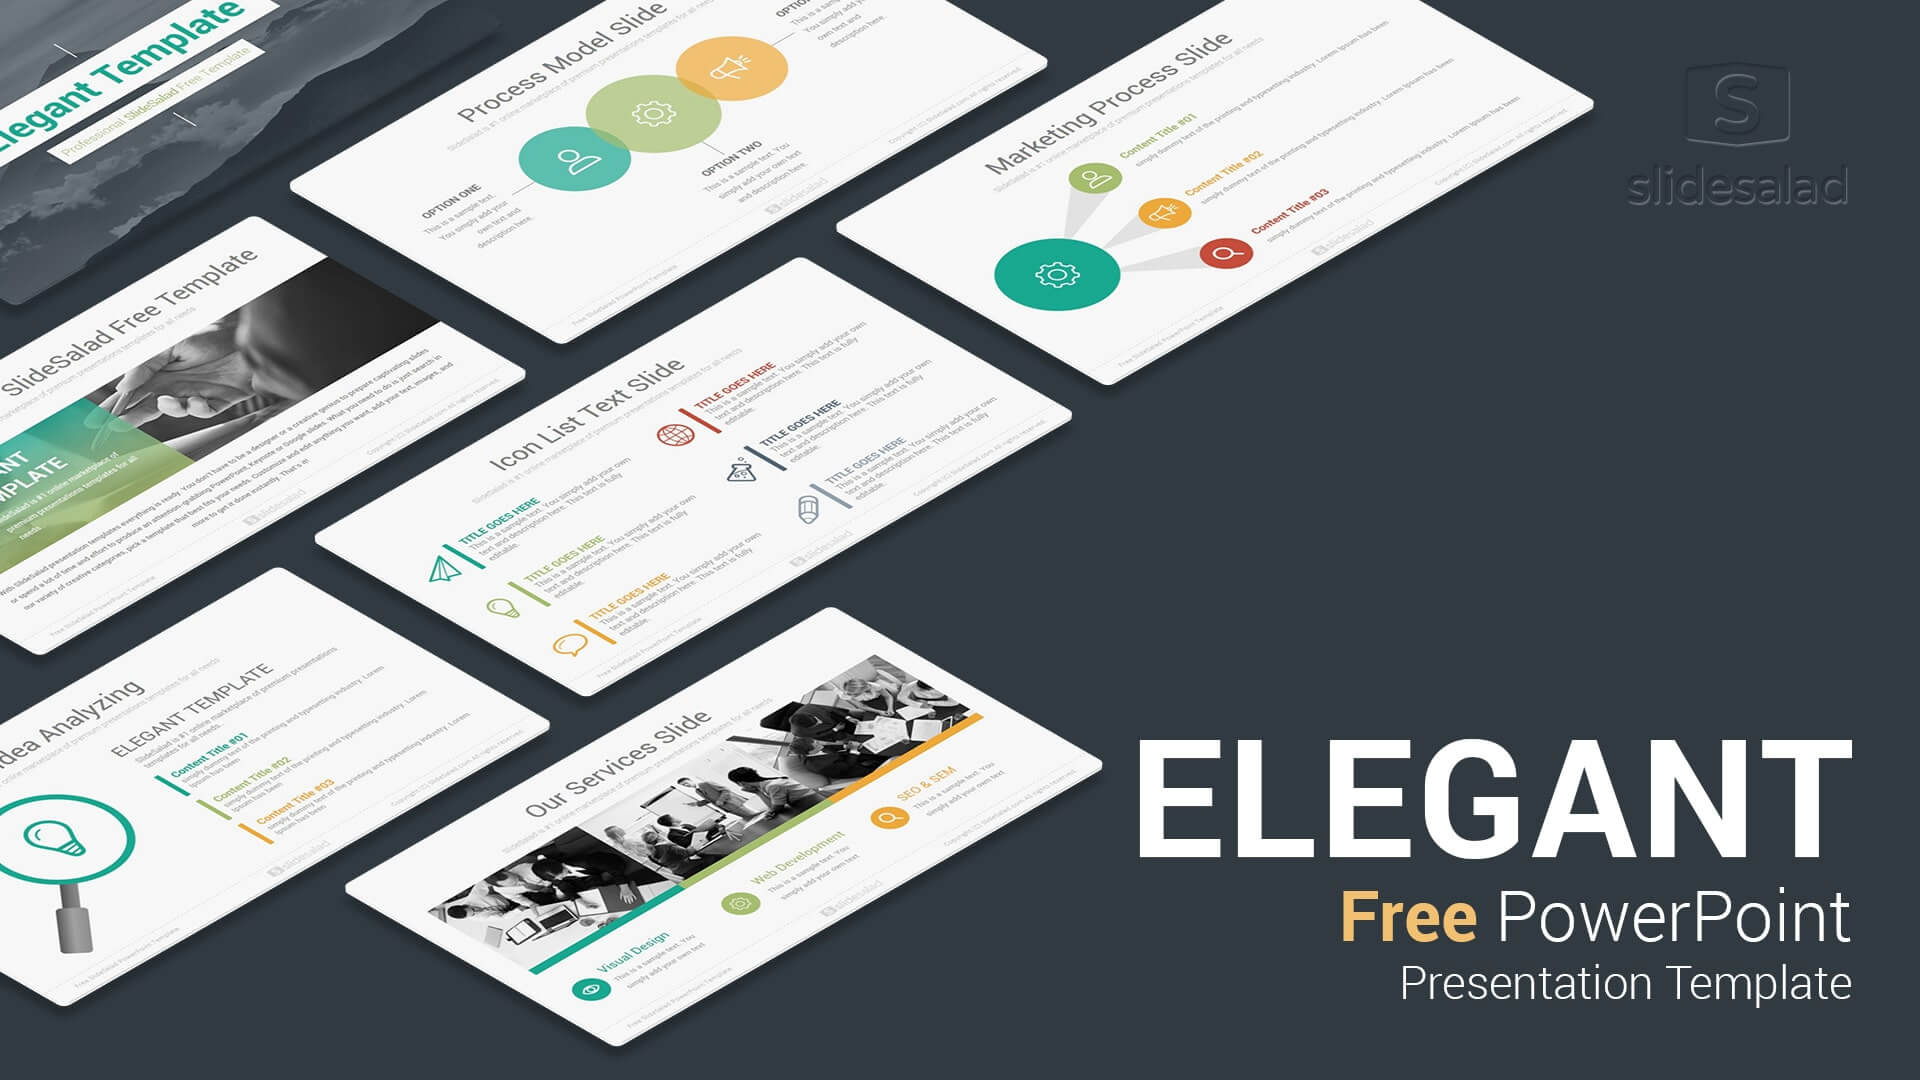 Elegant Free Download Powerpoint Templates For Presentation Throughout Free Powerpoint Presentation Templates Downloads